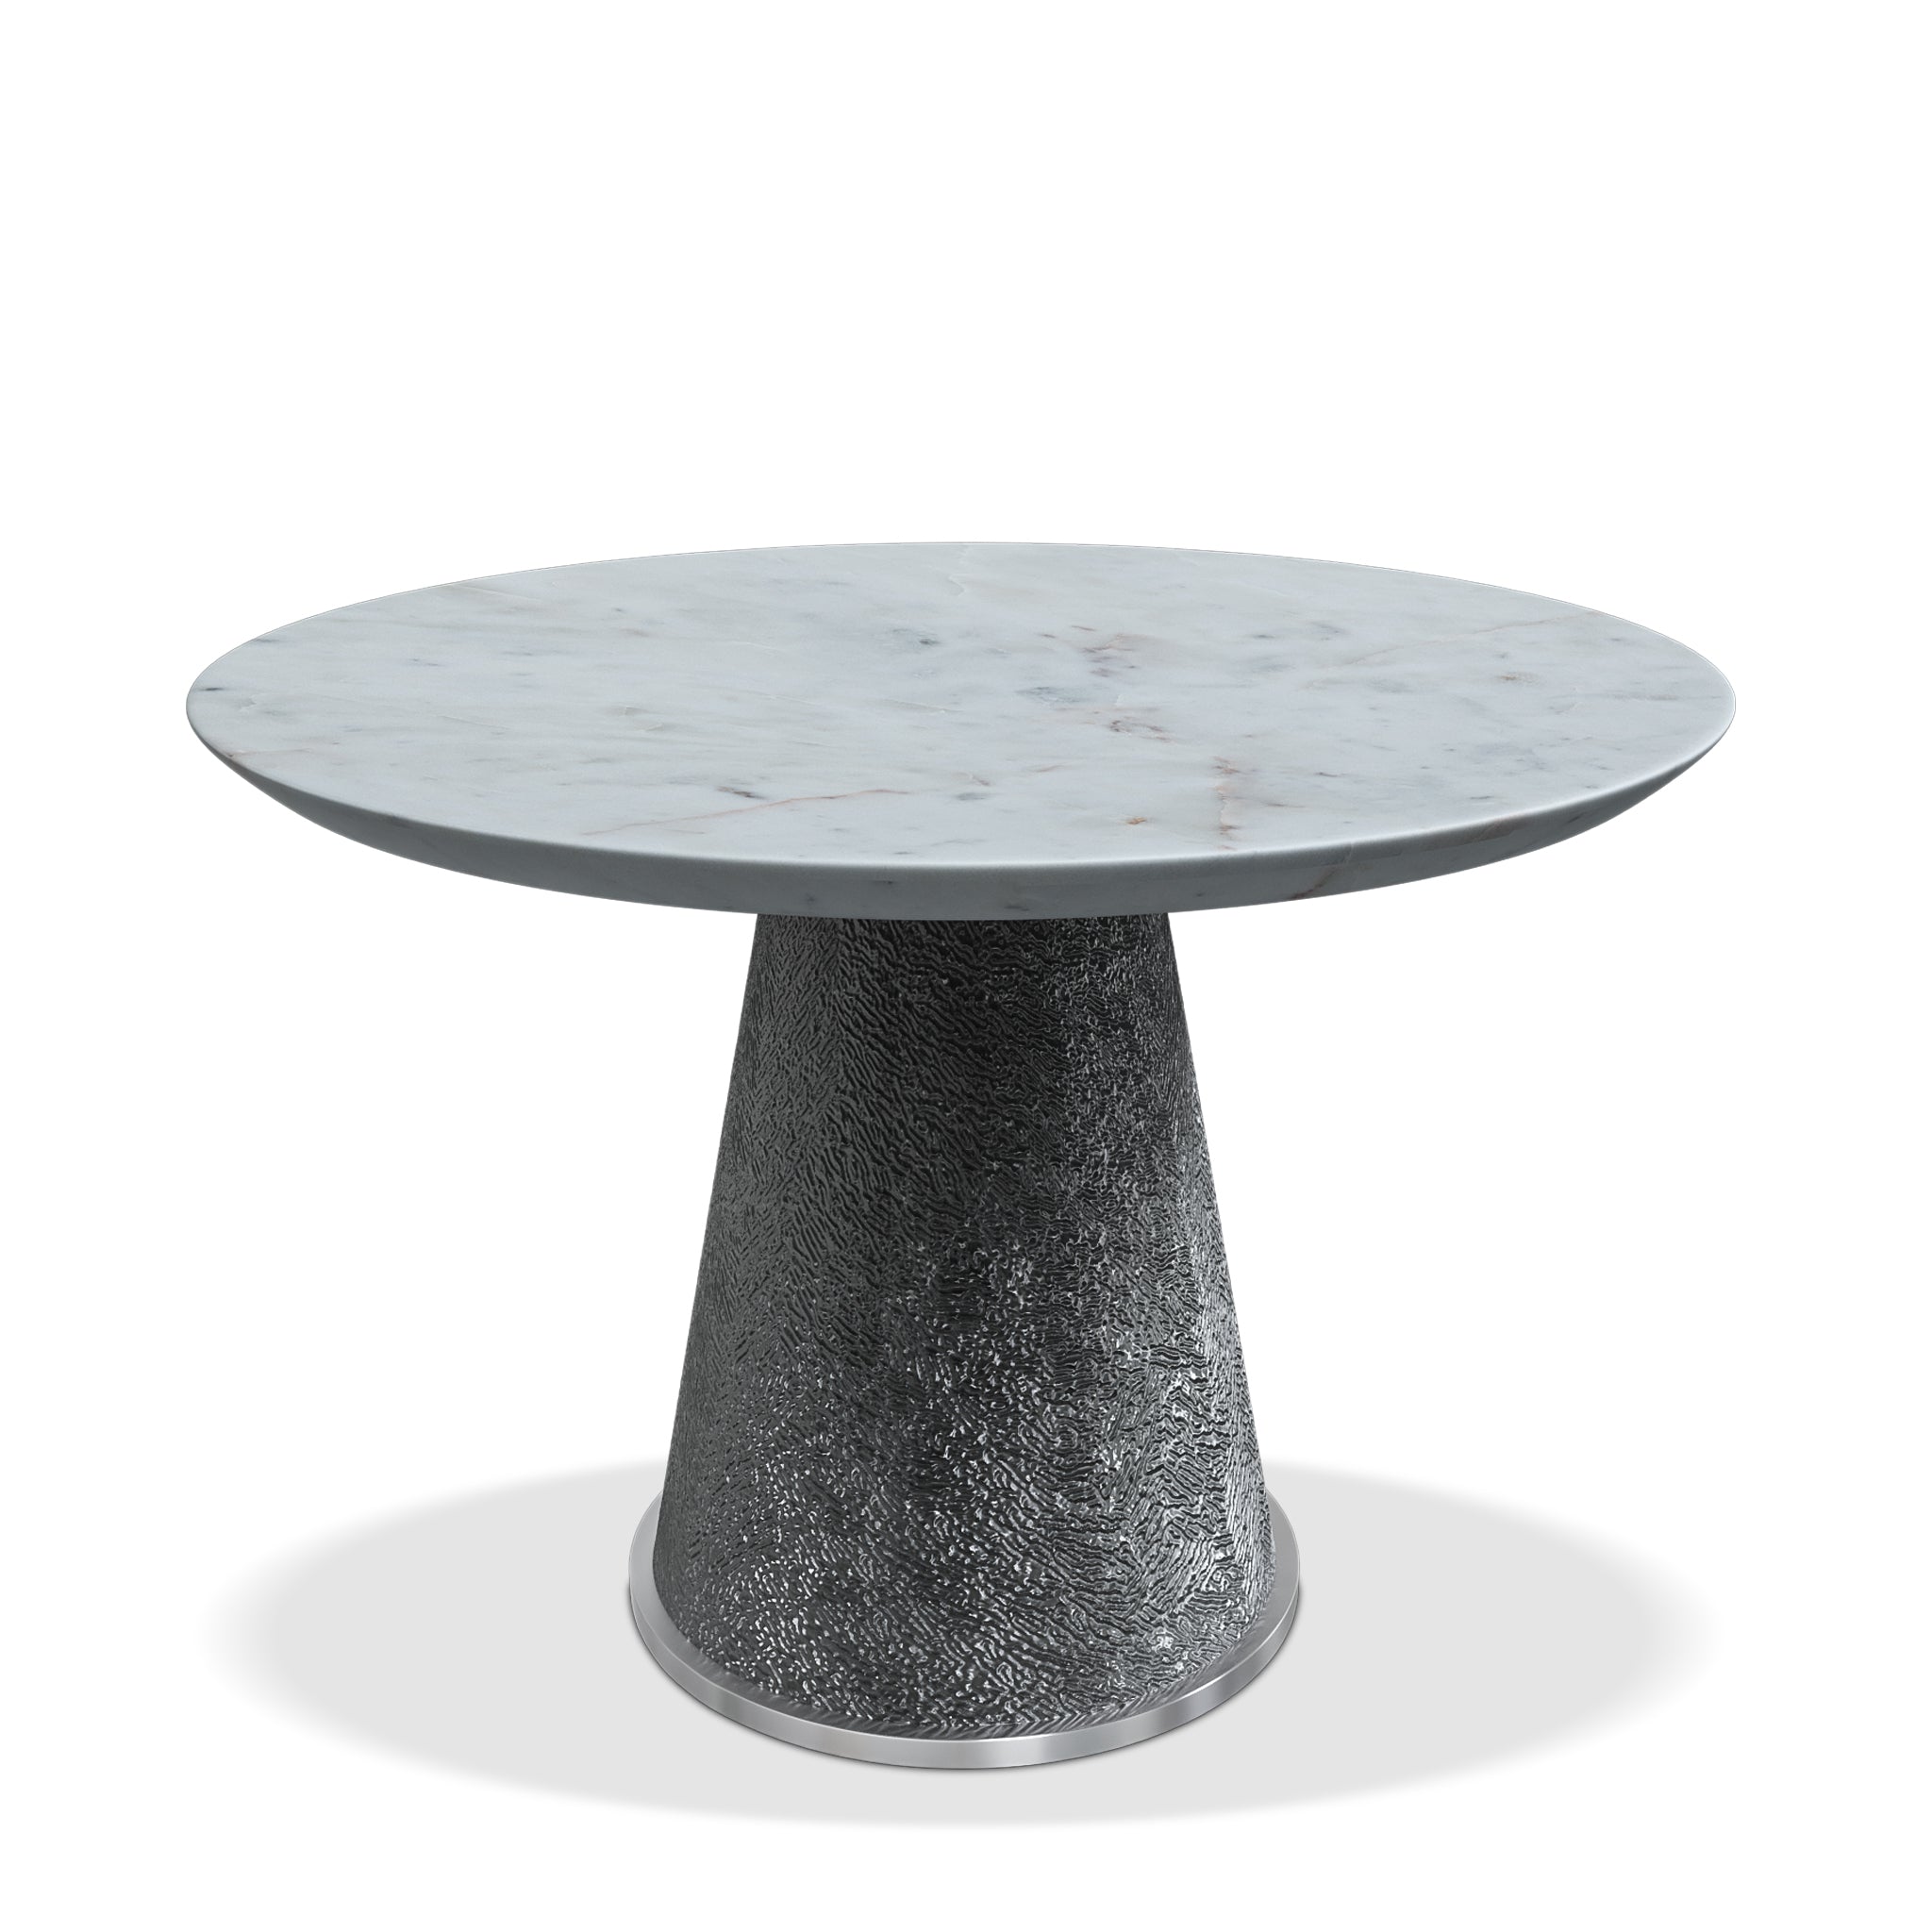 ANDAMAN MEDIO ANTIQUE SILVER ROUND DINING TABLE